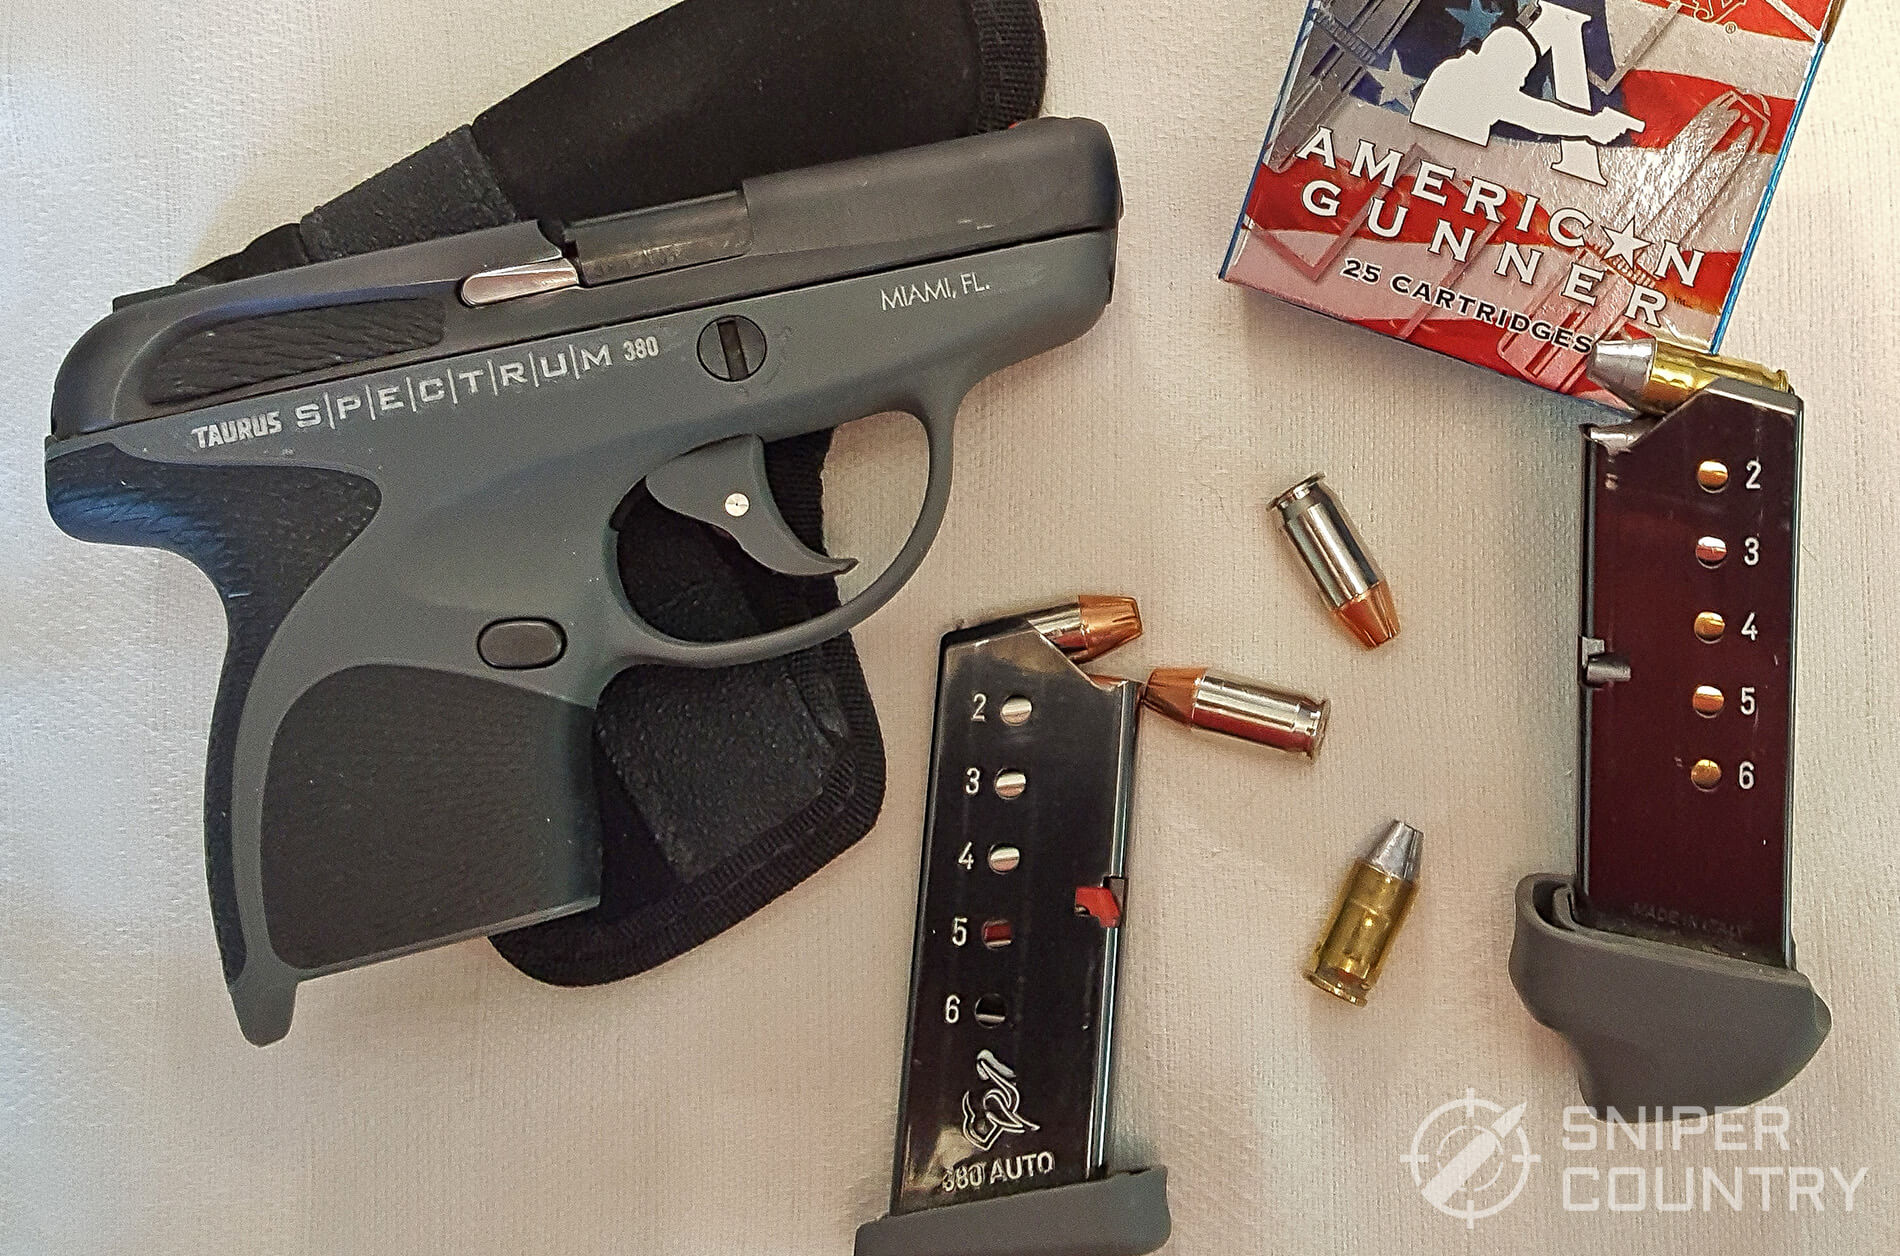 Taurus Spectrum 380 Subcompact Review Sniper Country